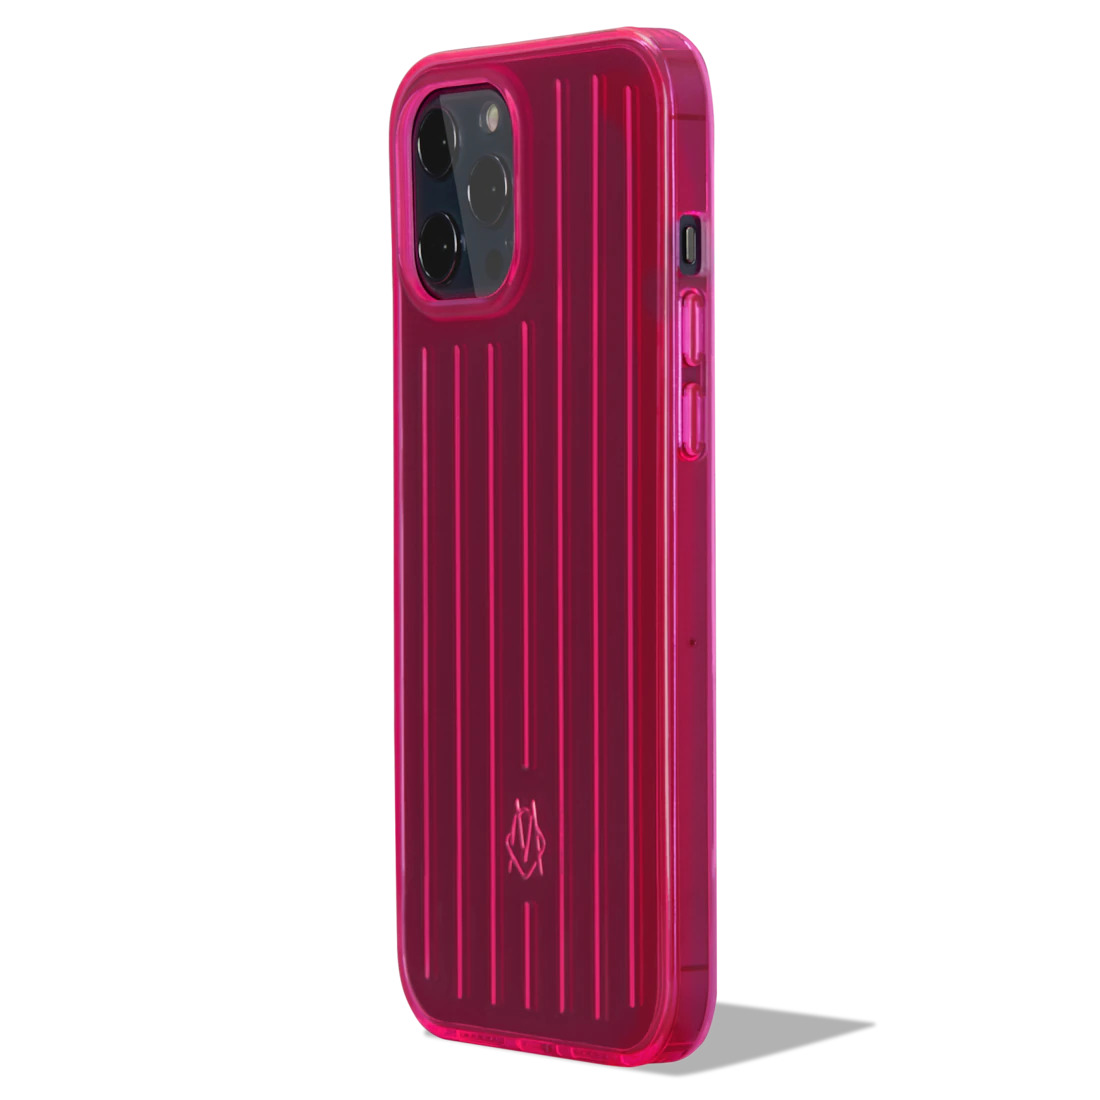 iPhone Accessories Neon Pink Case for iPhone 12 Pro Max - 2